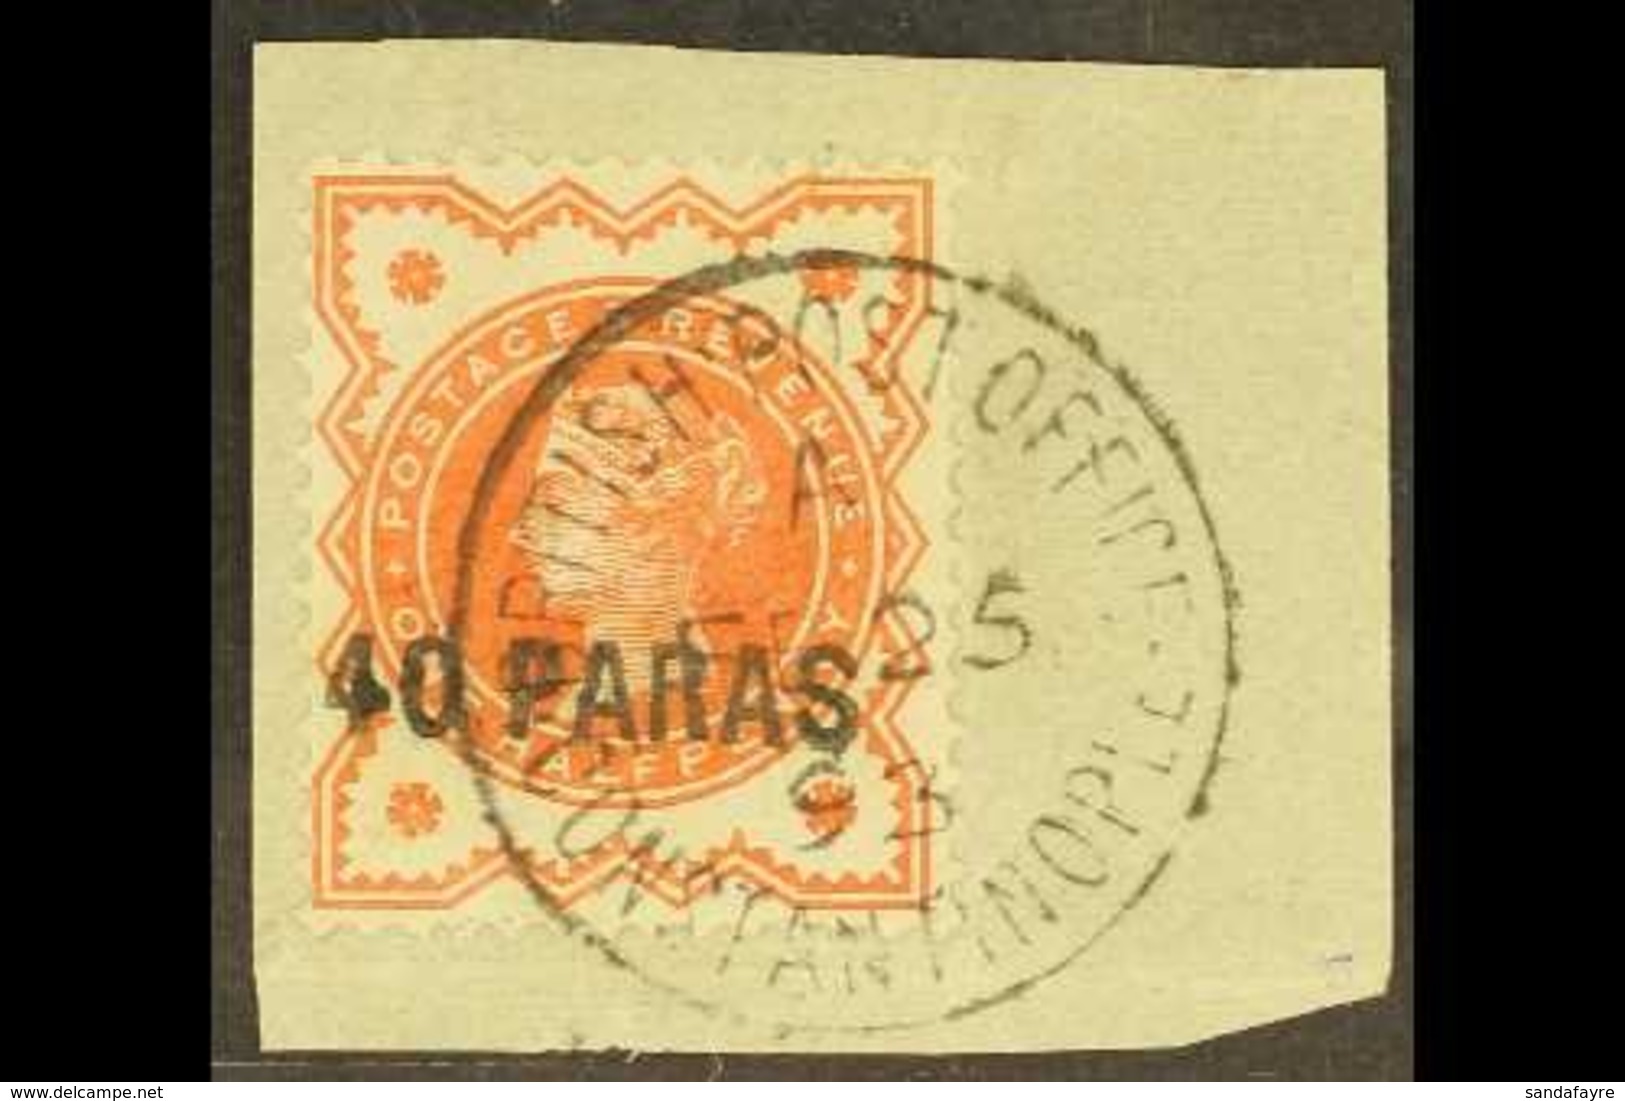 1893  40pa On ½d Vermilion, SG 7, Superb Used On Piece With "full S", Showing Complete Constantinople Fe 25 93 Cds. For  - Britisch-Levant